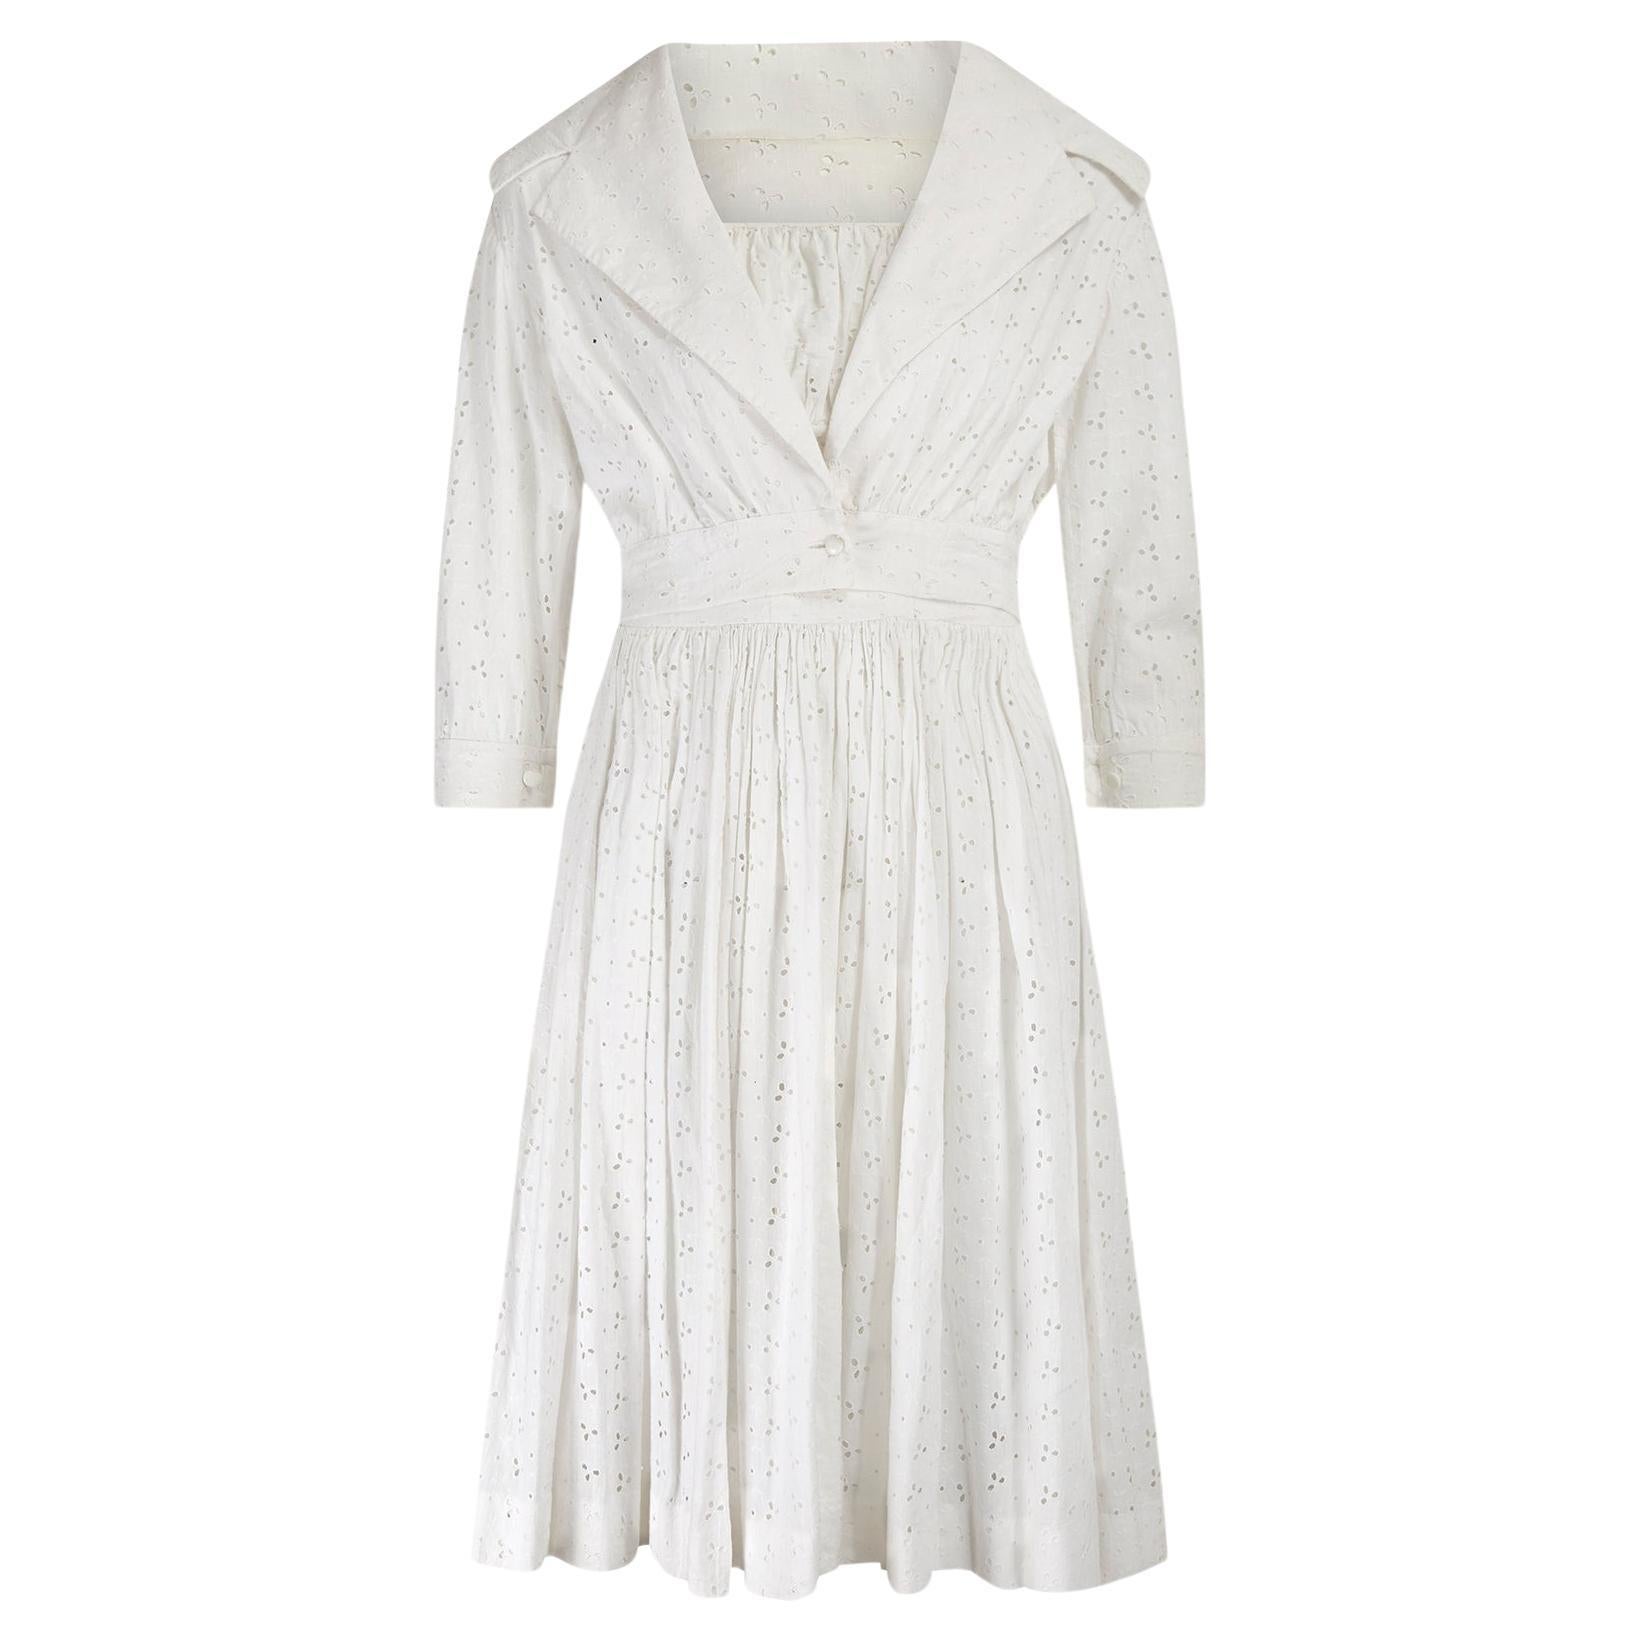 1960s White Cotton Broderie Anglaise Dress and Jacket Set